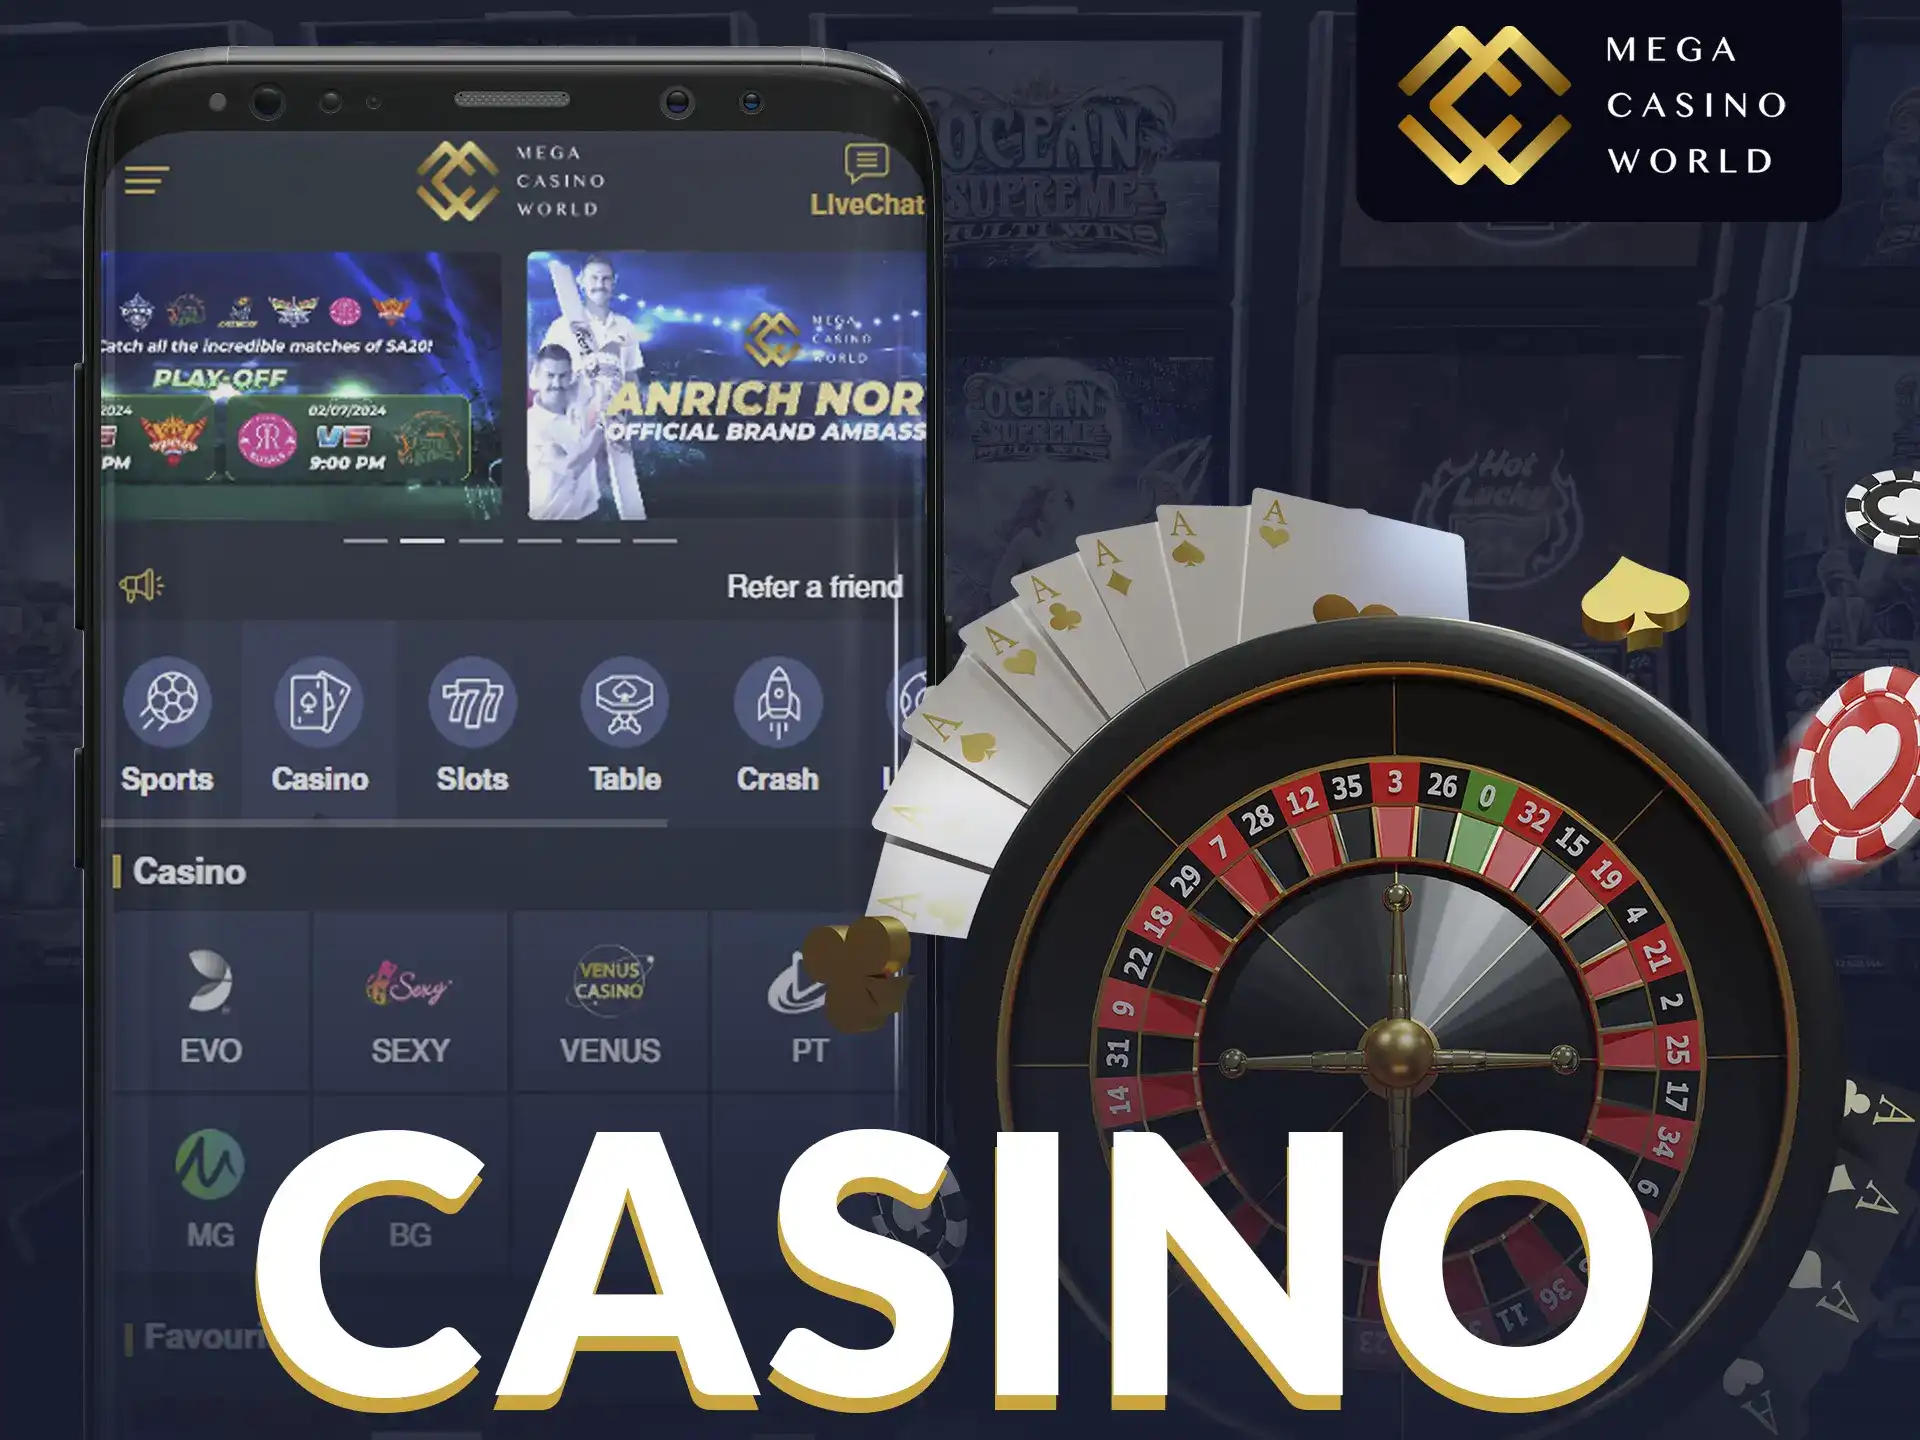 At Mega Casino World, you'll find thousands of interesting and exciting games for every taste.